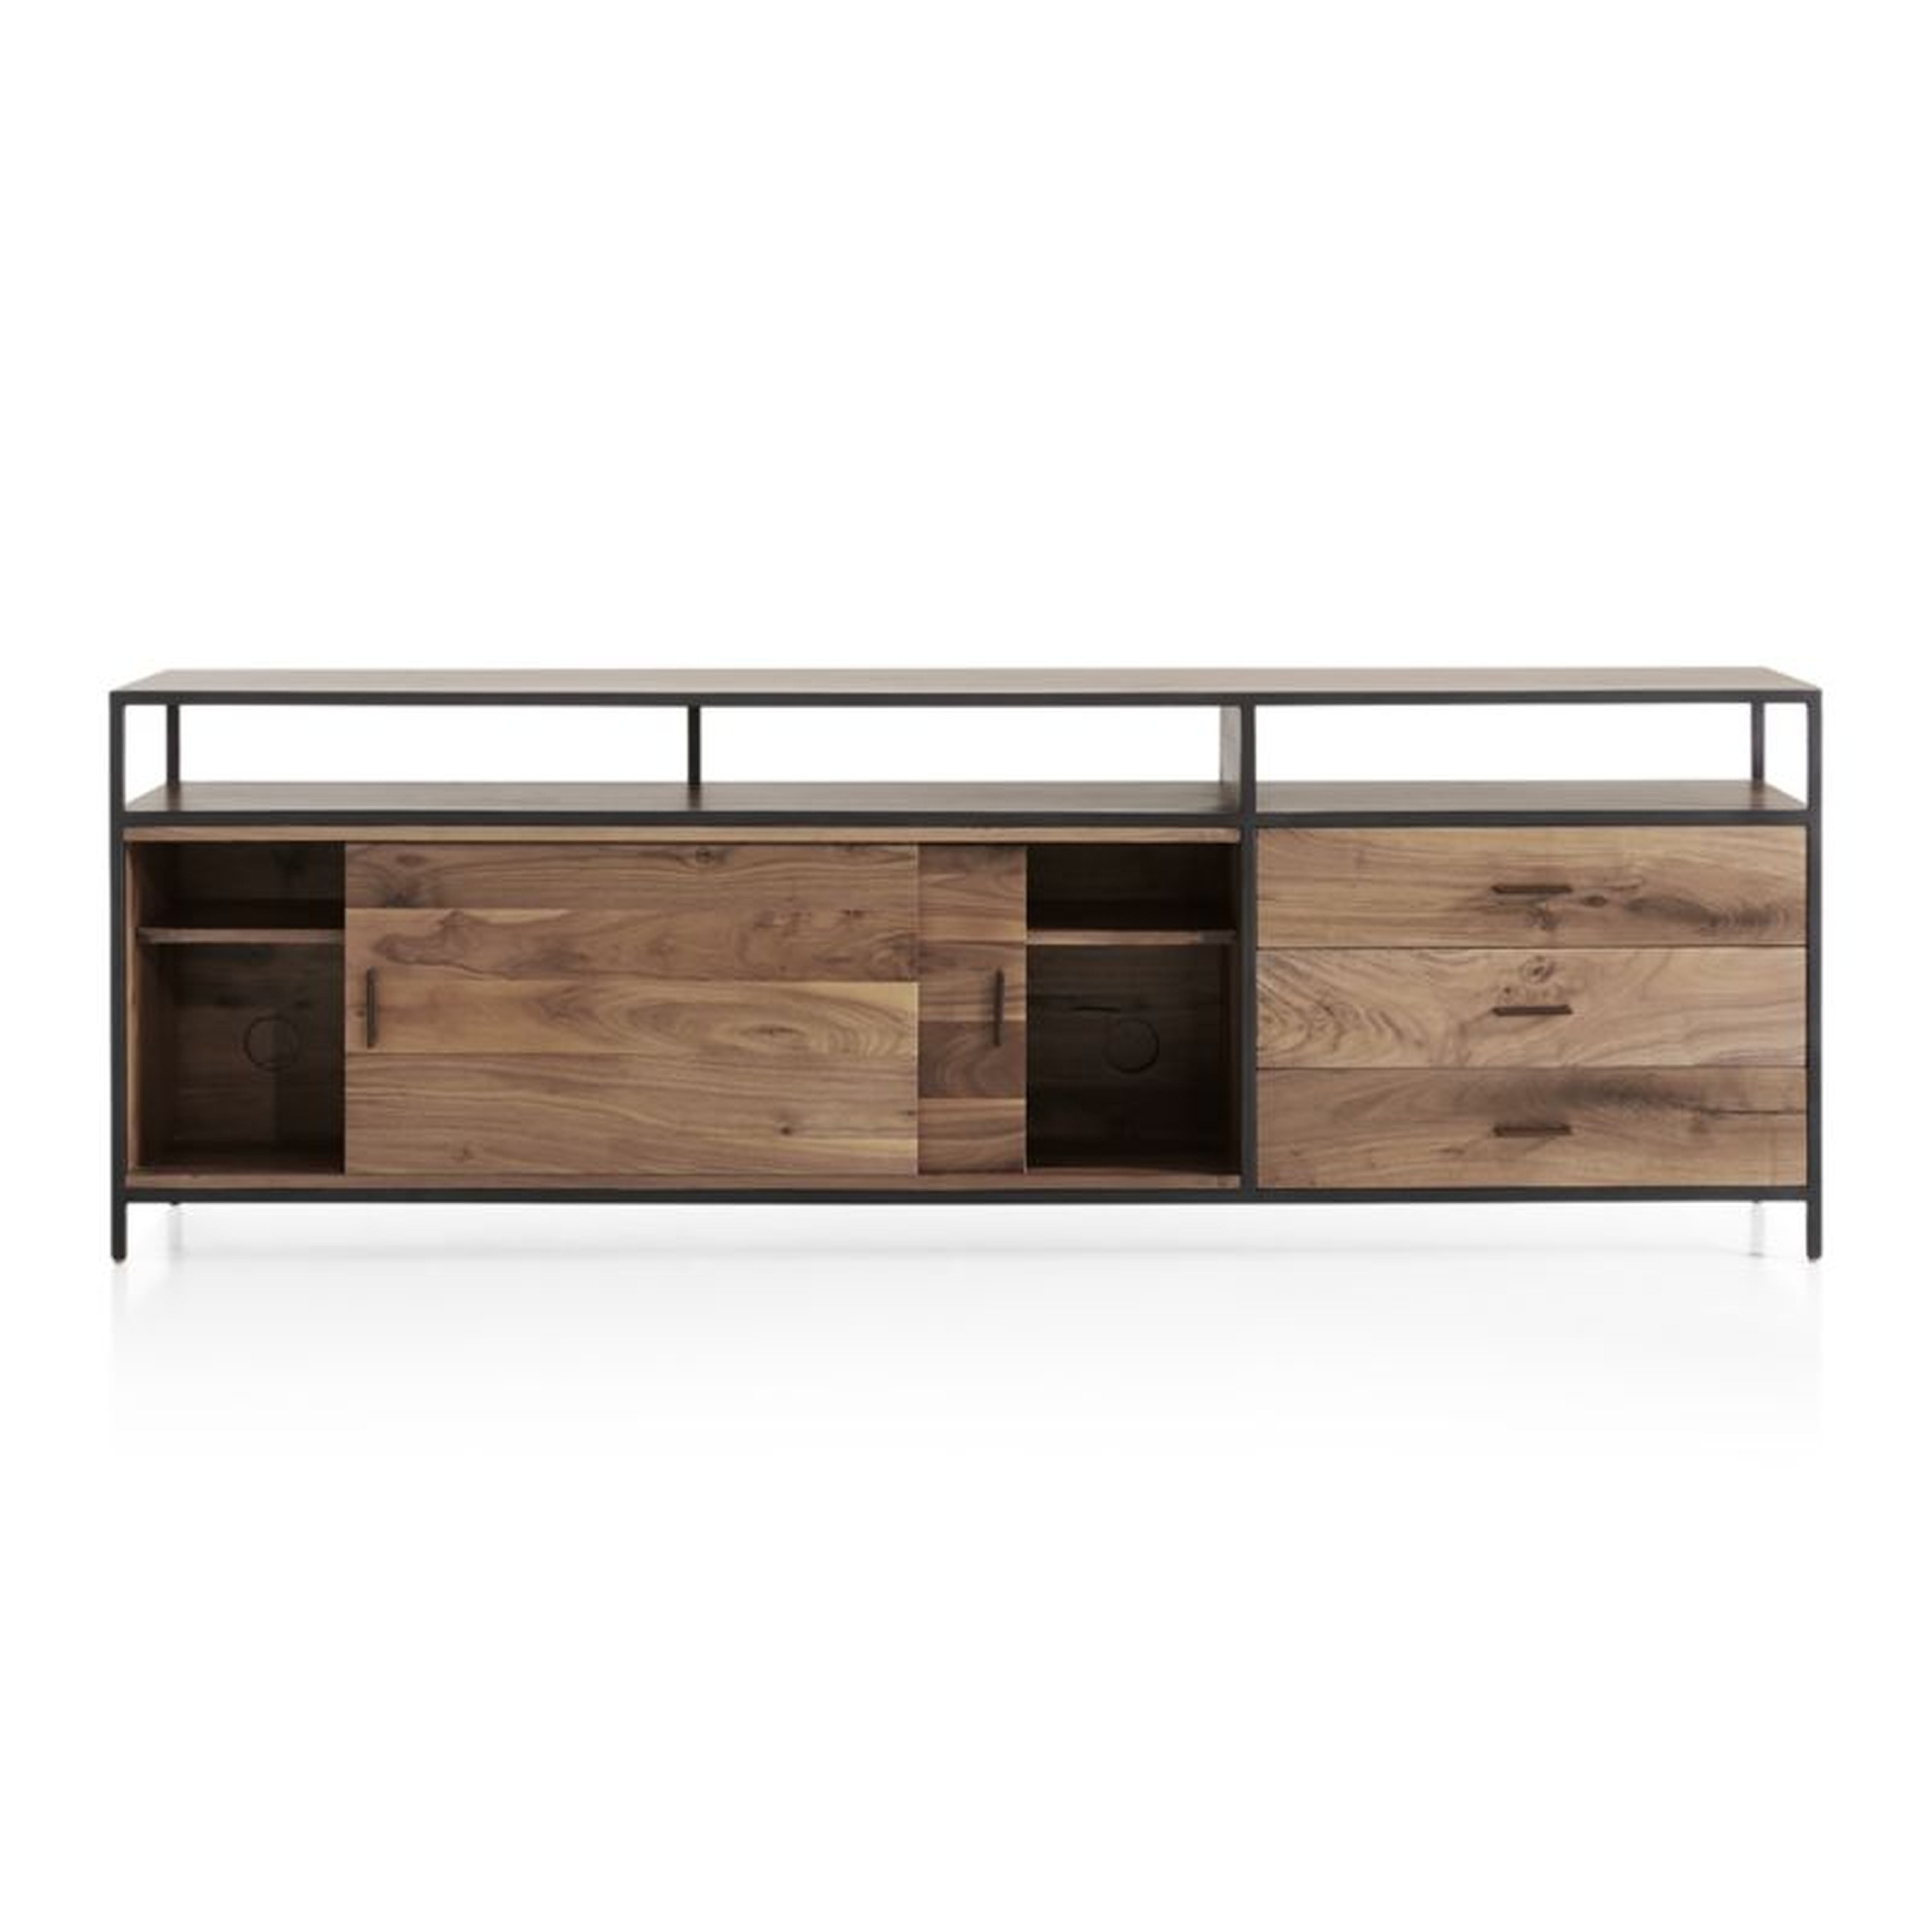 Knox Black 90" Industrial Media Console - Crate and Barrel